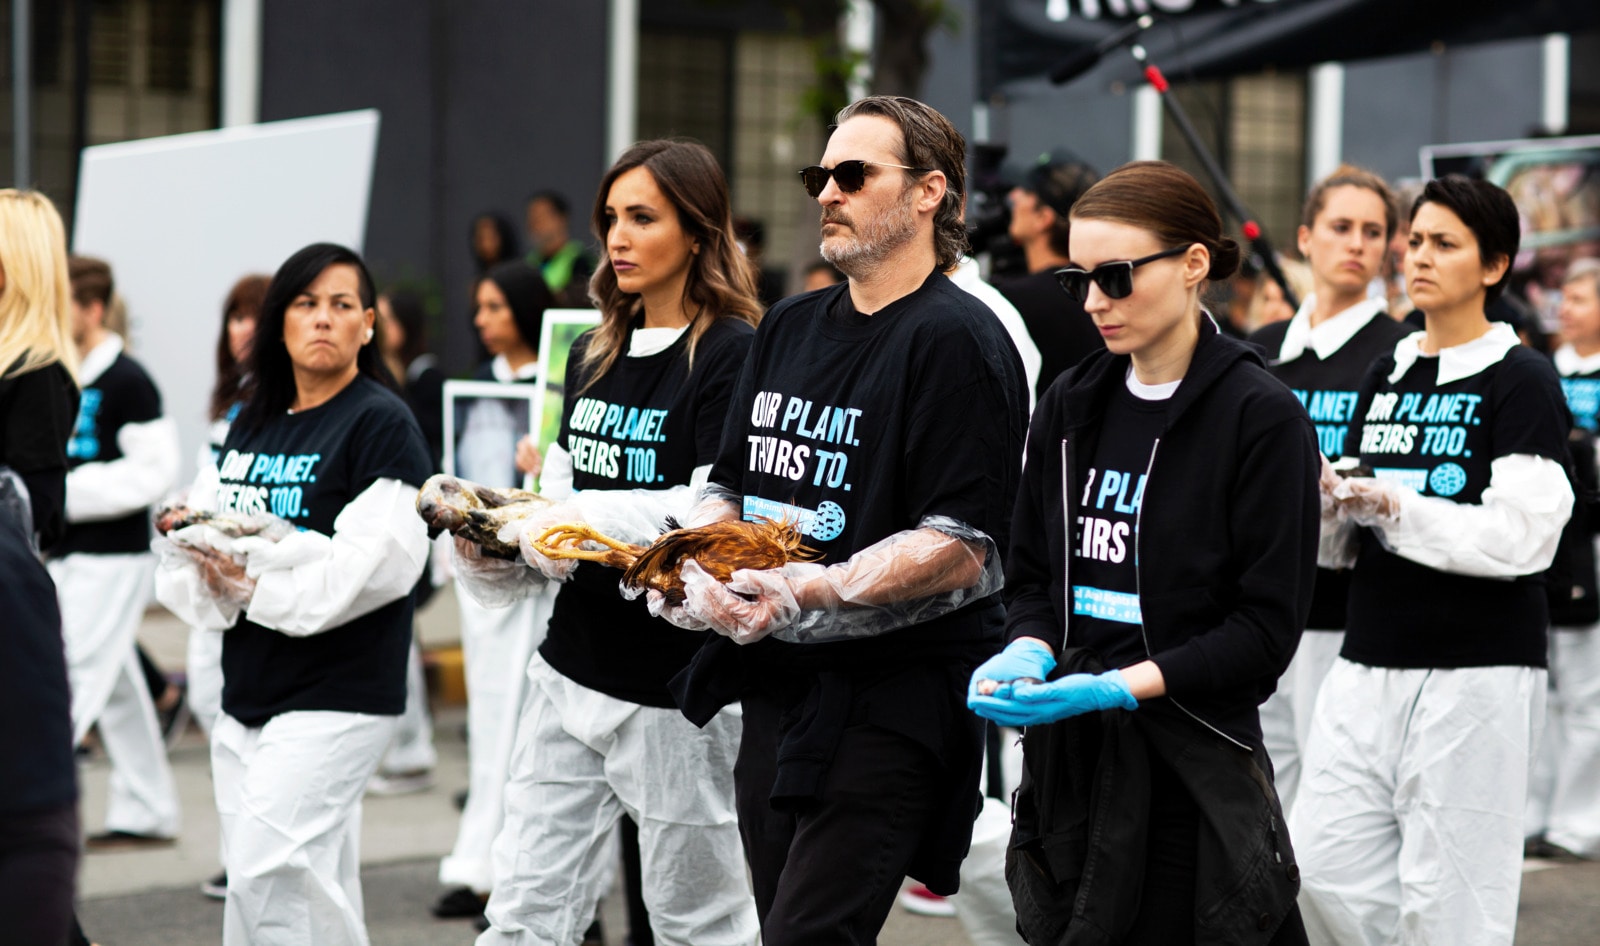 Joaquin Phoenix and Rooney Mara March for Animal Rights